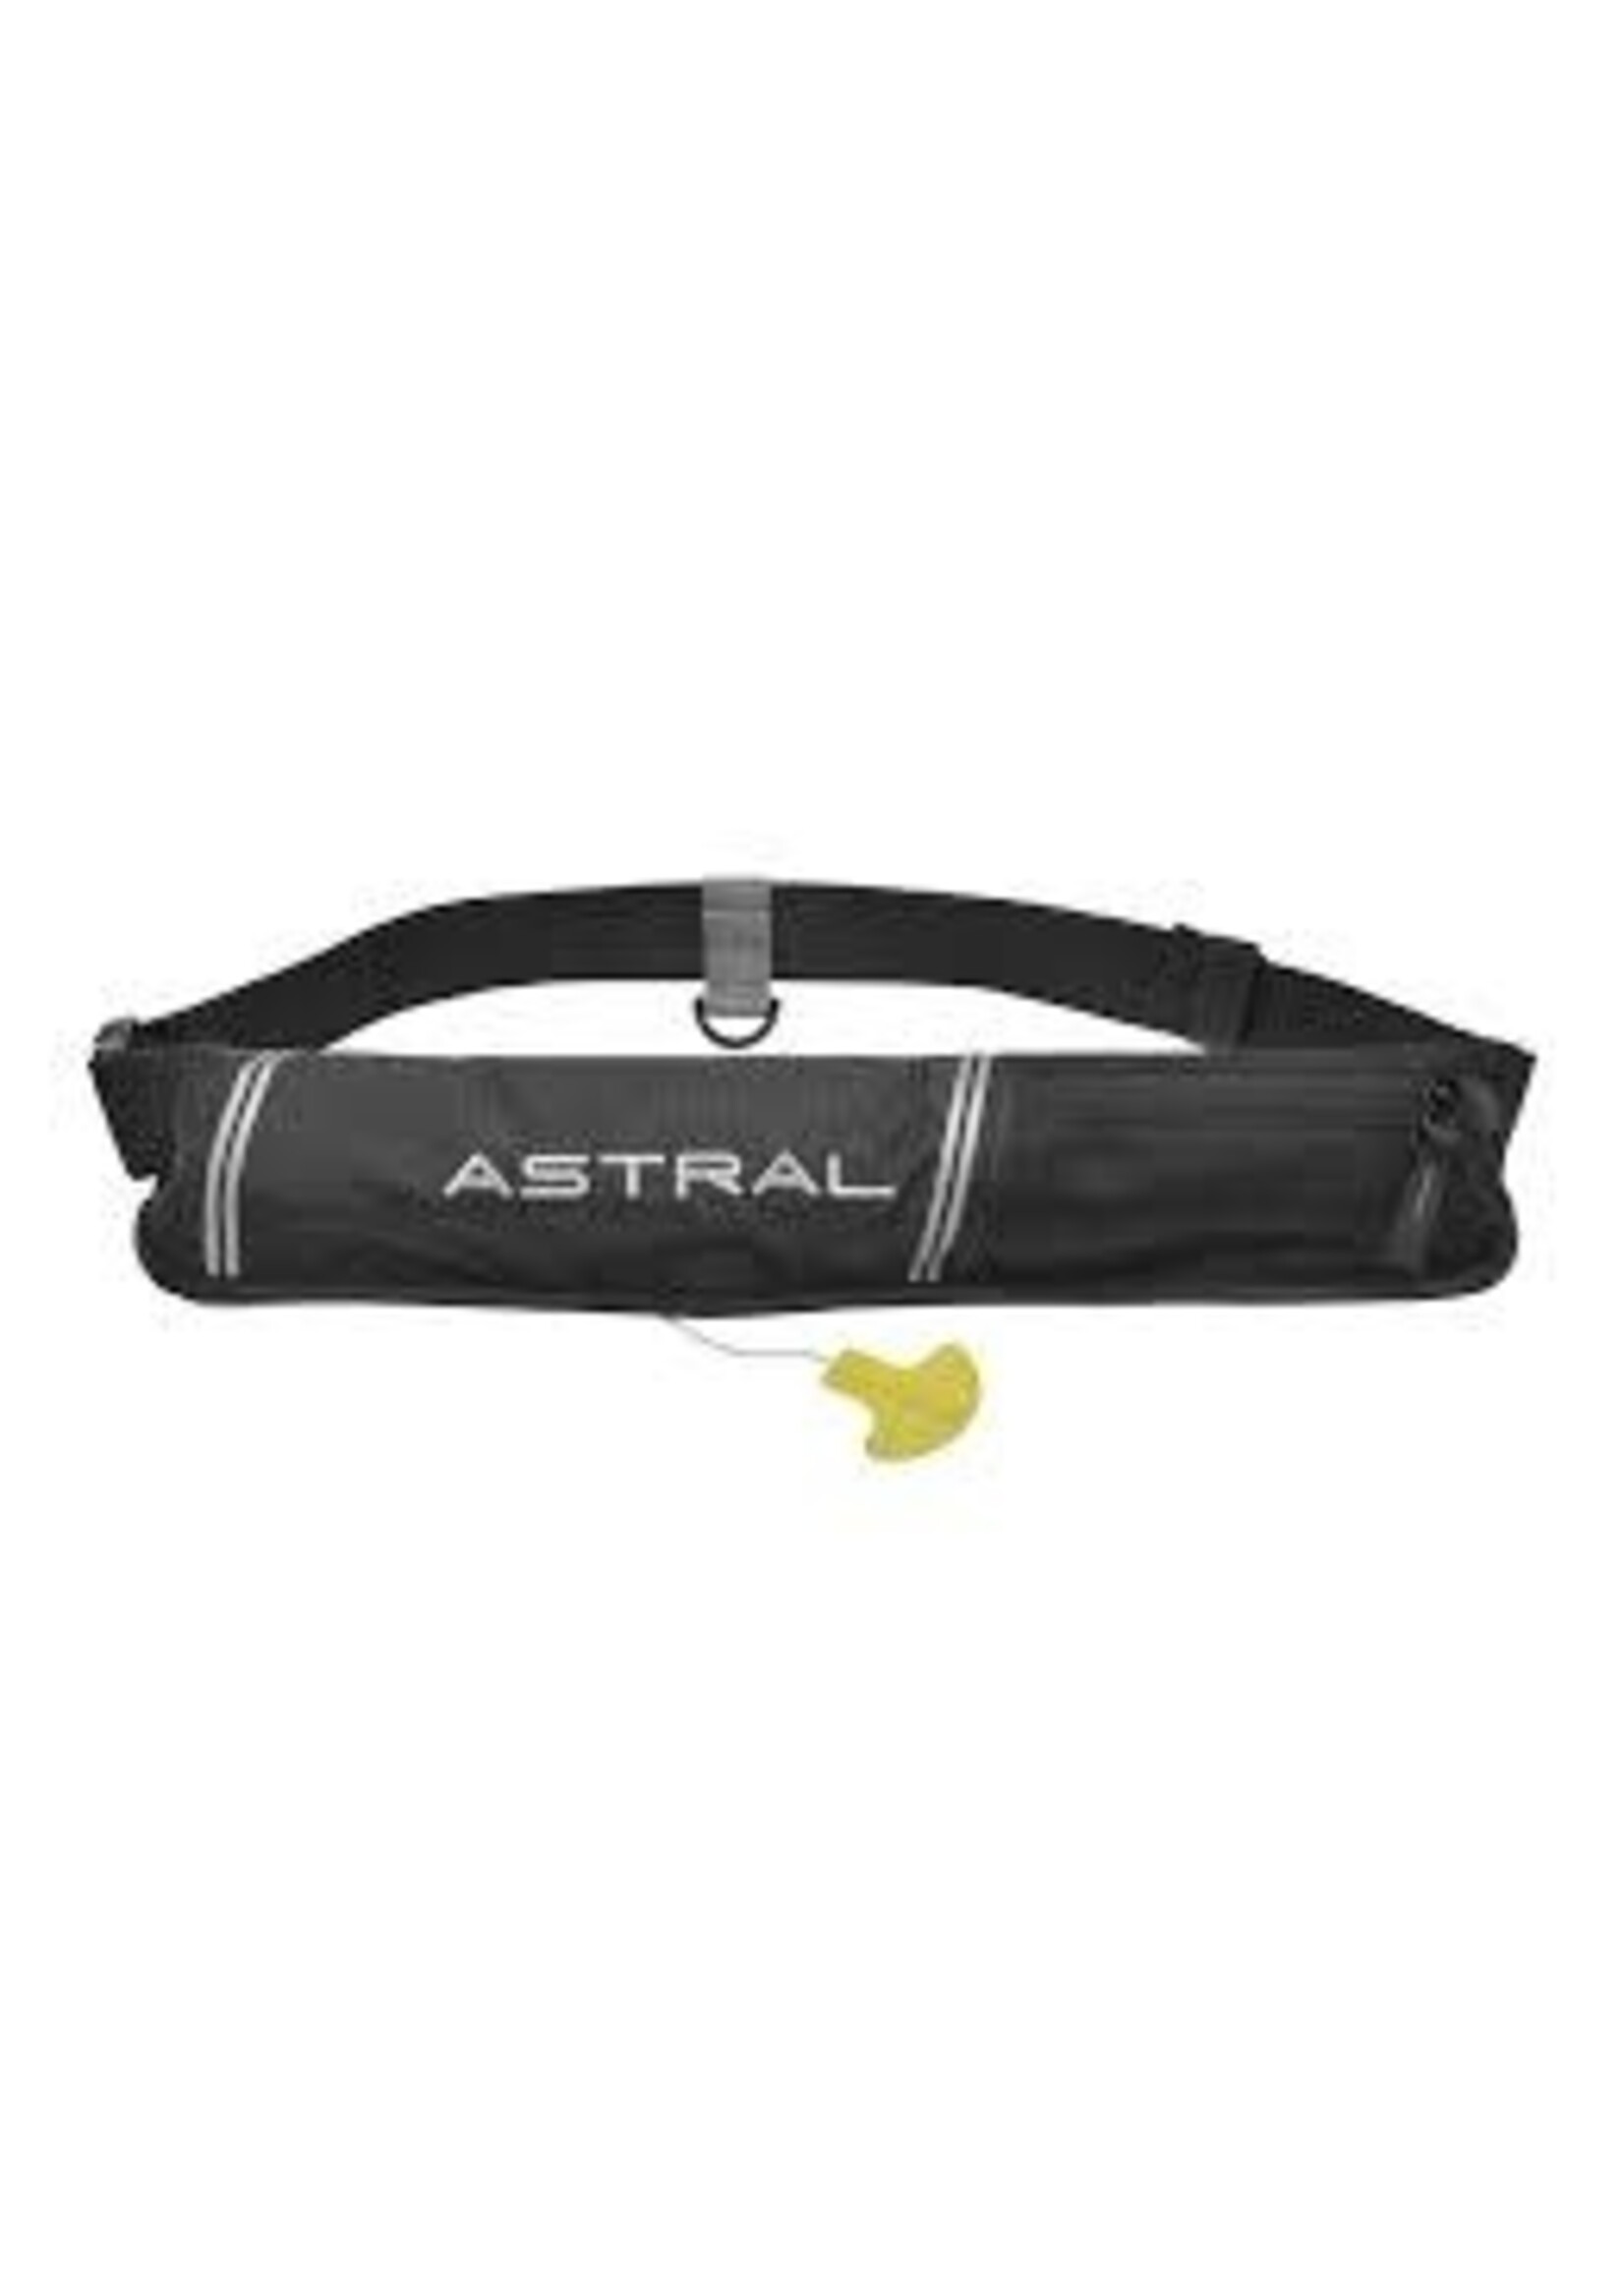 Astral Bouyancy Company Astral Airbelt